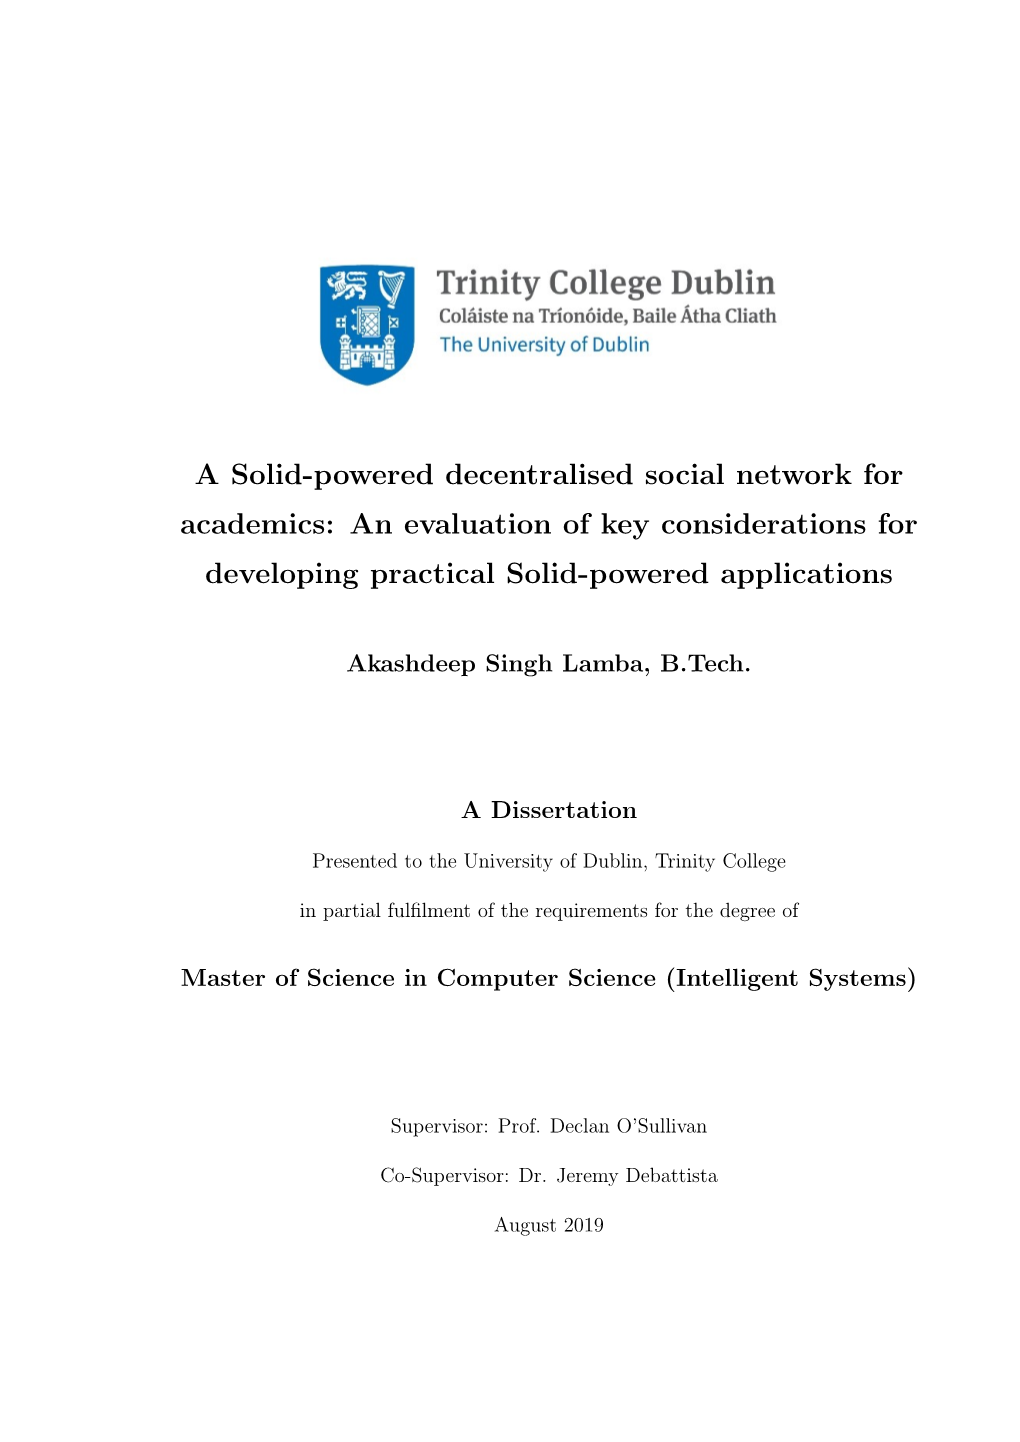 A Solid-Powered Decentralised Social Network for Academics: an Evaluation of Key Considerations for Developing Practical Solid-Powered Applications